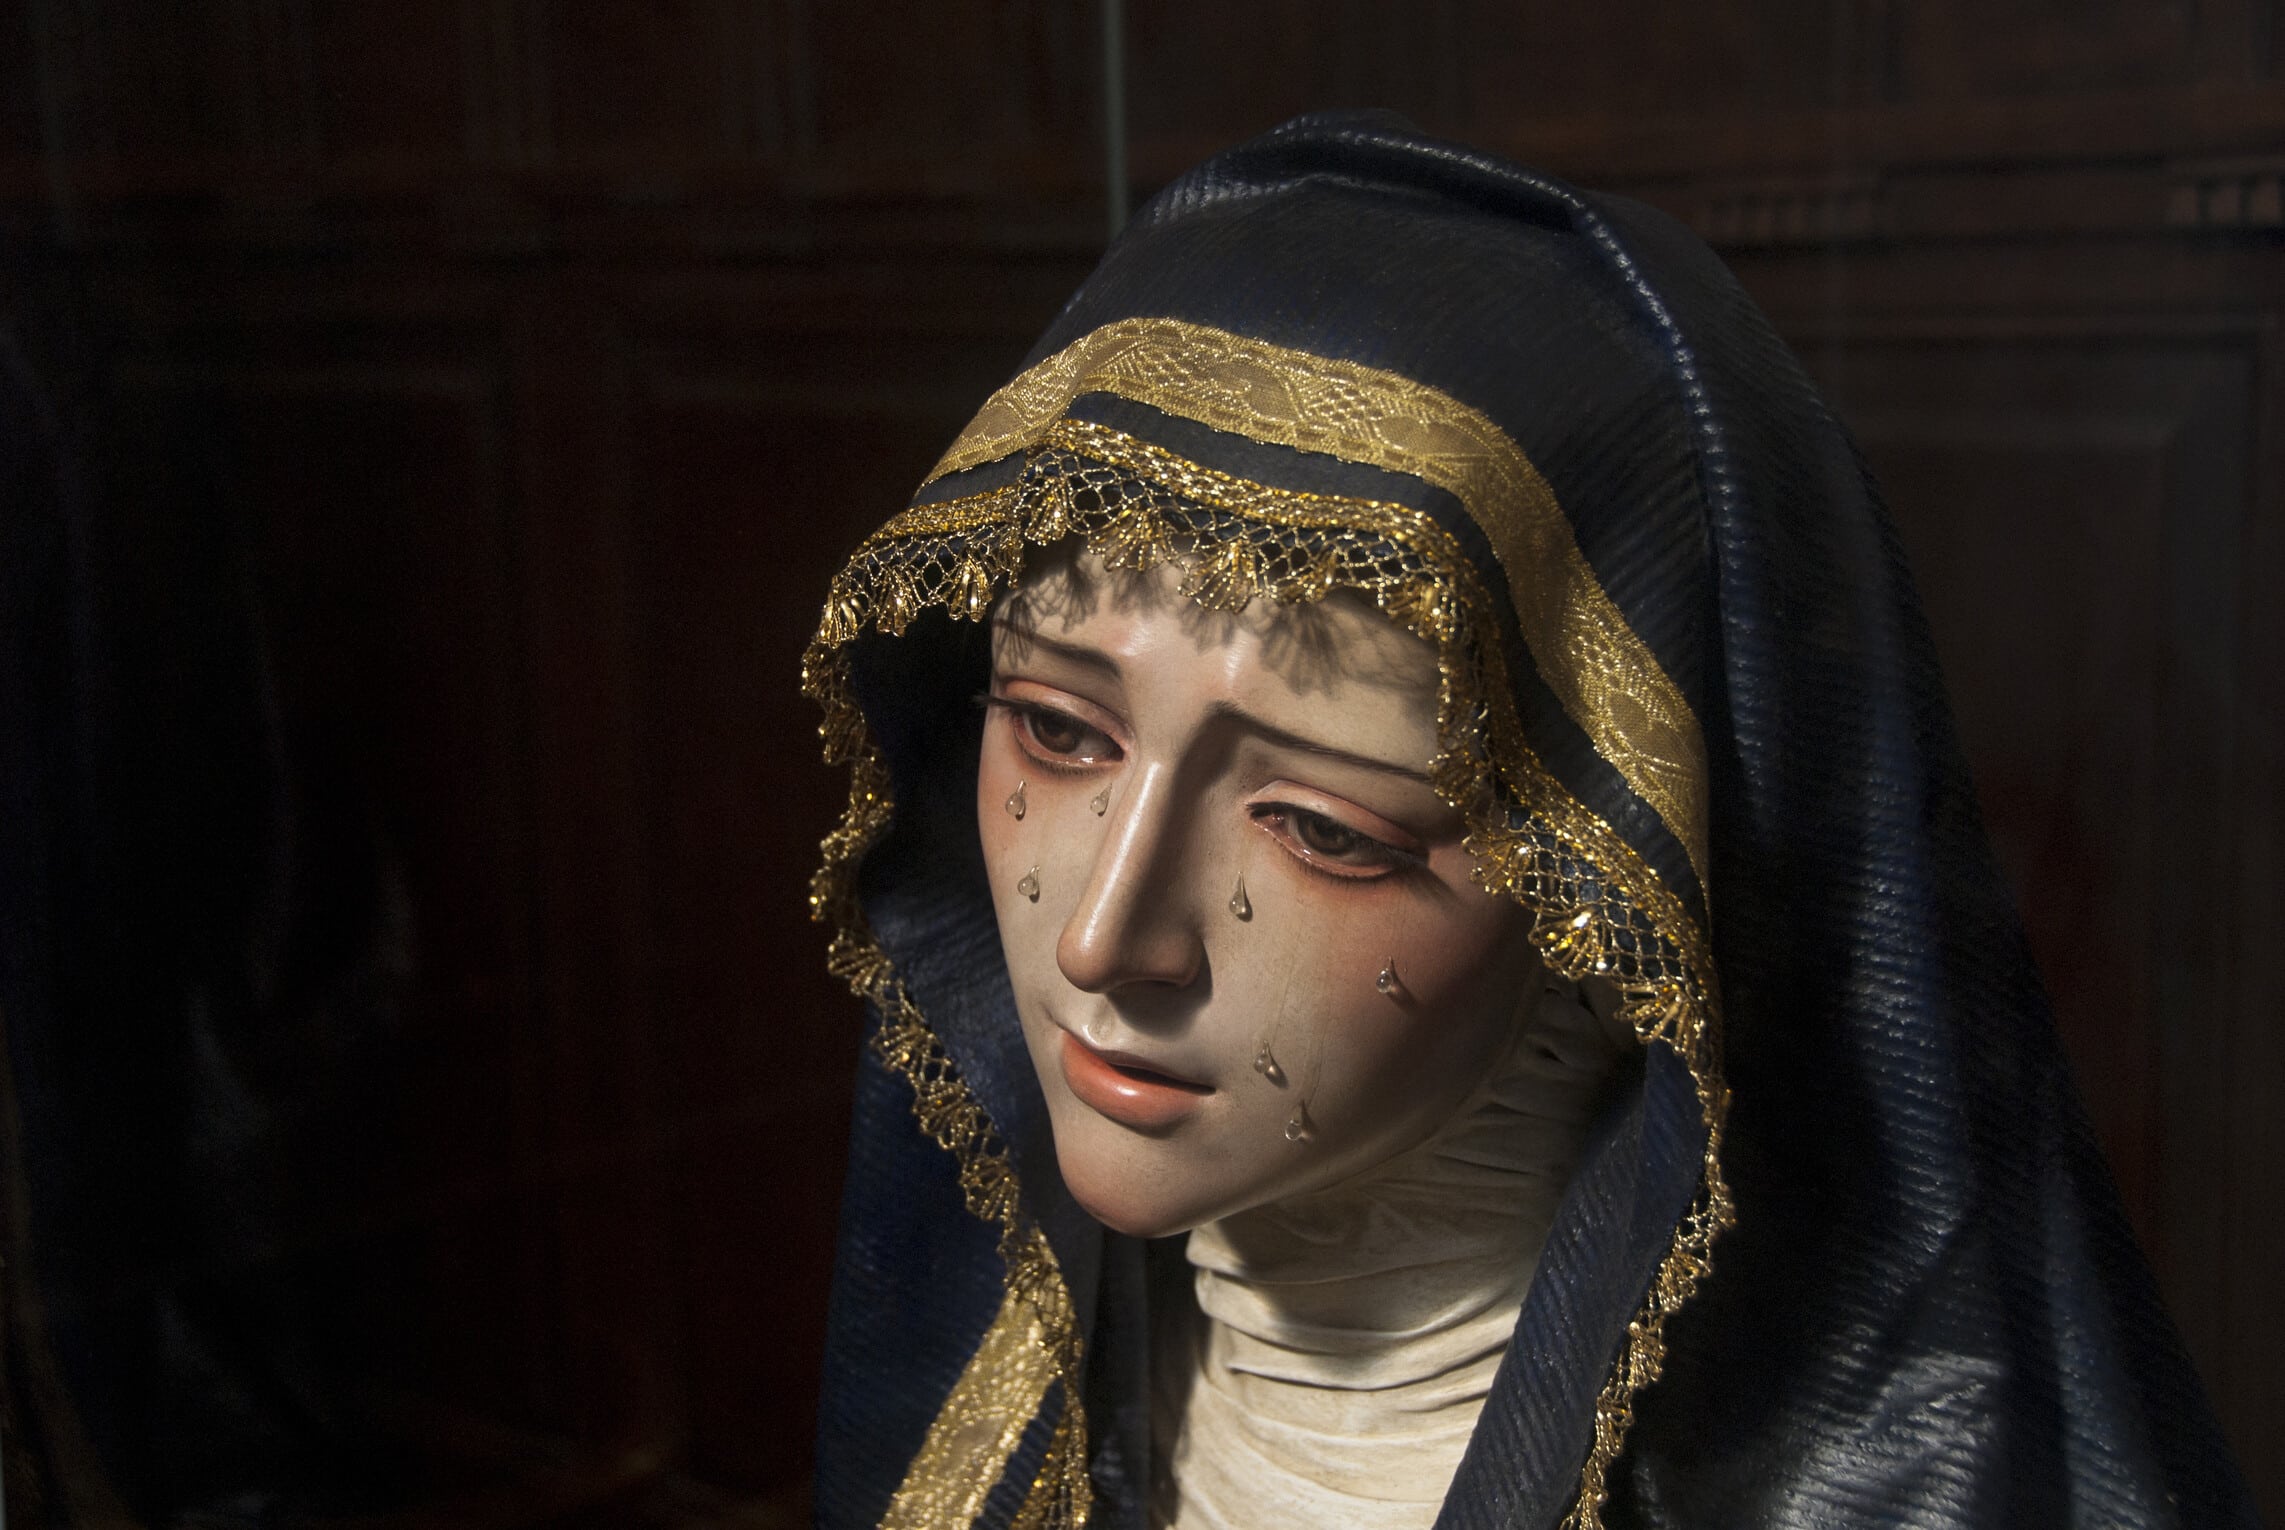 https://www.franciscanmedia.org/wp-content/uploads/2022/12/virgin-mary-with-seven-tears-on-her-face.jpeg